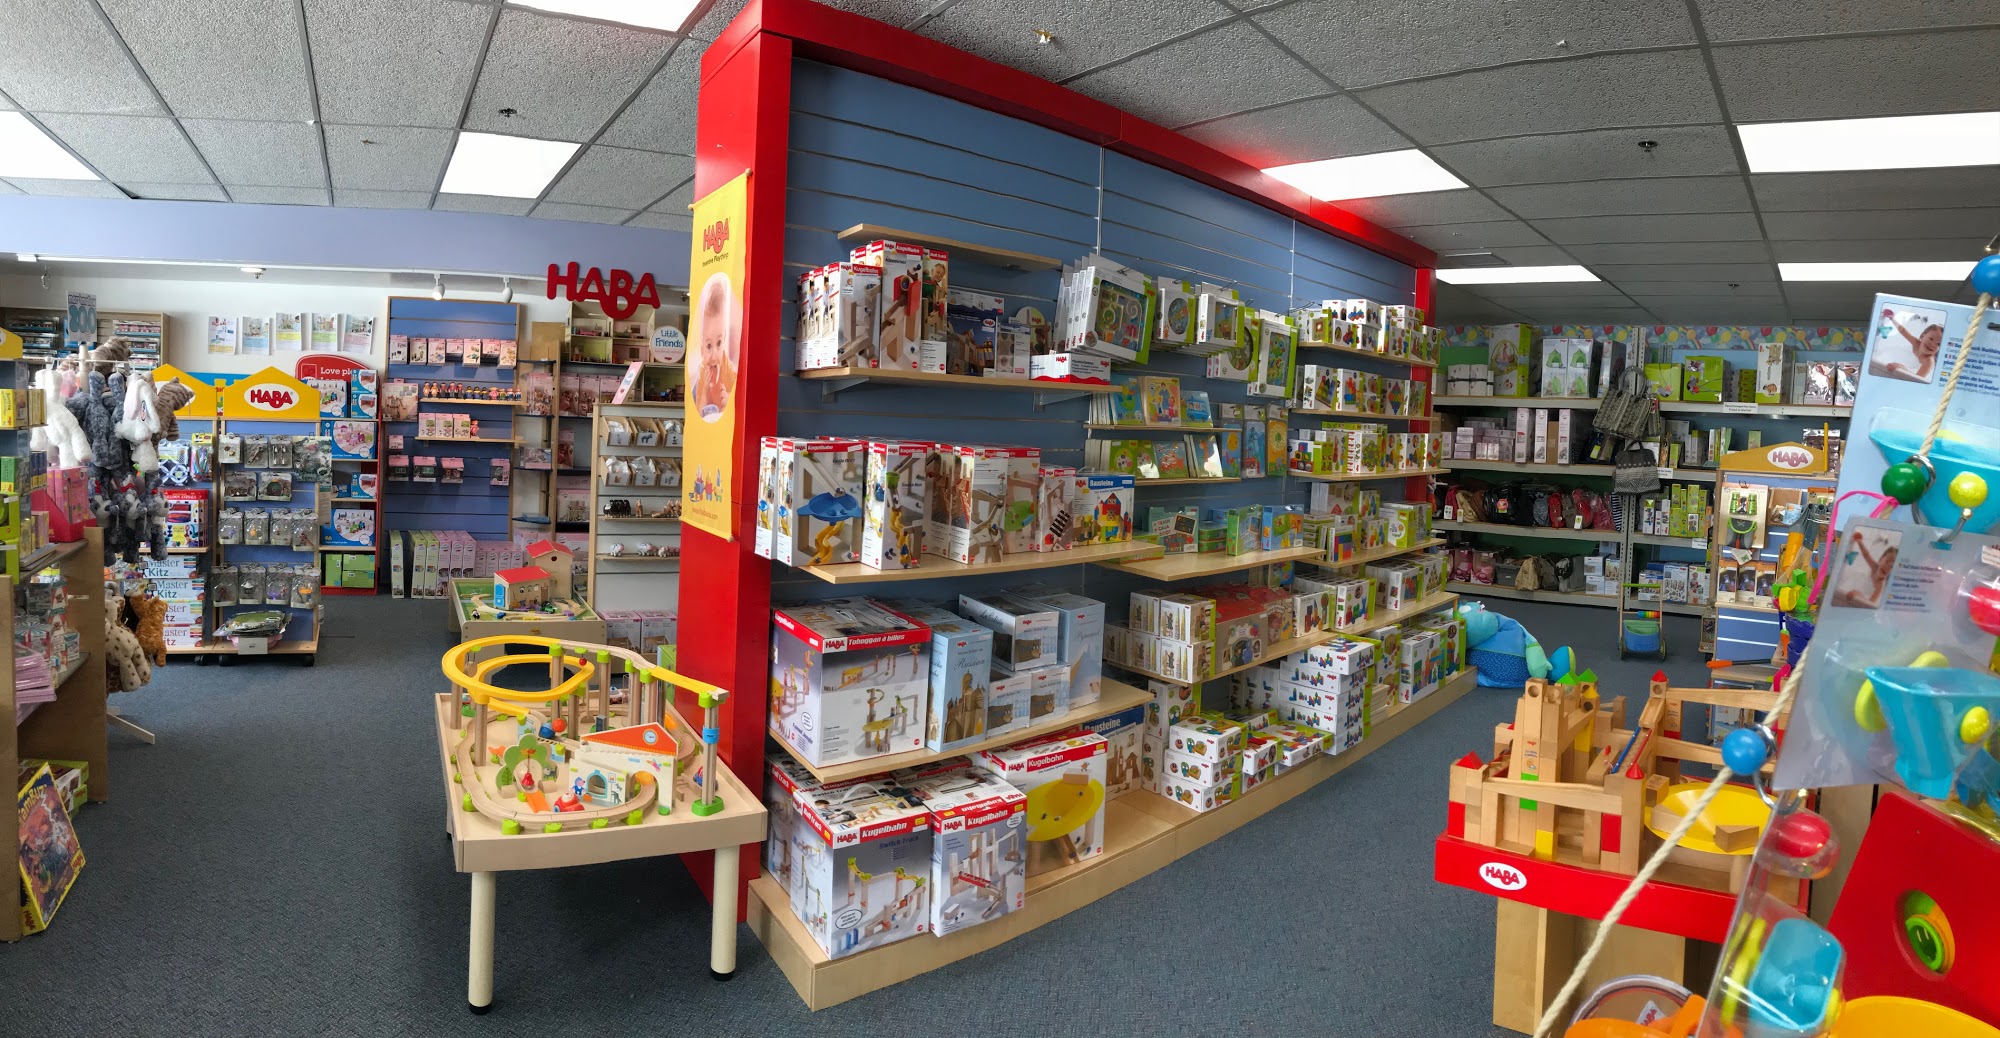 The HABA Toy Outlet